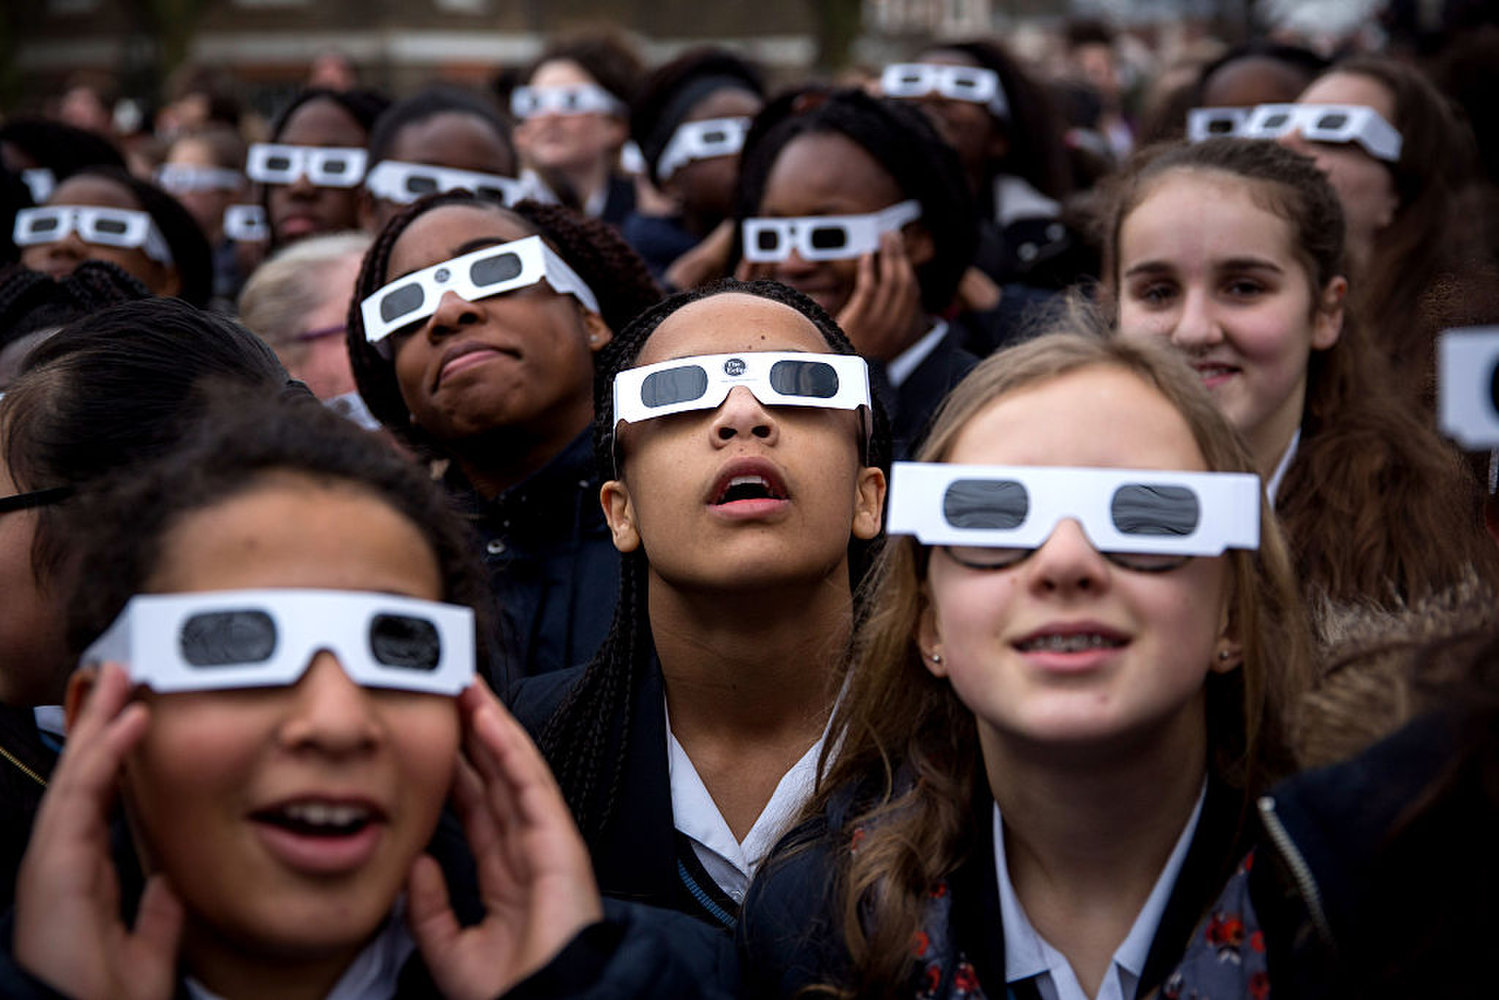 LONDON, UNITED KINGDOM - MARCH 20: Students from Saint Ursula's Covent Secondary School in Greenwich pose for a photograph wearing protective glasses at the Royal Observatory Greenwich on March 20, 2015 in London, England. Hundreds of people gathered outside The Royal Observatory Greenwich hoping see a near total solar eclipse. The solar eclipse, which occurs when the Moon passes between the Sun and the Earth, started at 08:24 GMT and continues until 10:41 GMT, with the maximum obscuration of the Sun happening at 09:31 GMT. The last significant solar eclipse visible from the UK was on 11 August, 1999. (Photo by Rob Stothard/Getty Images)